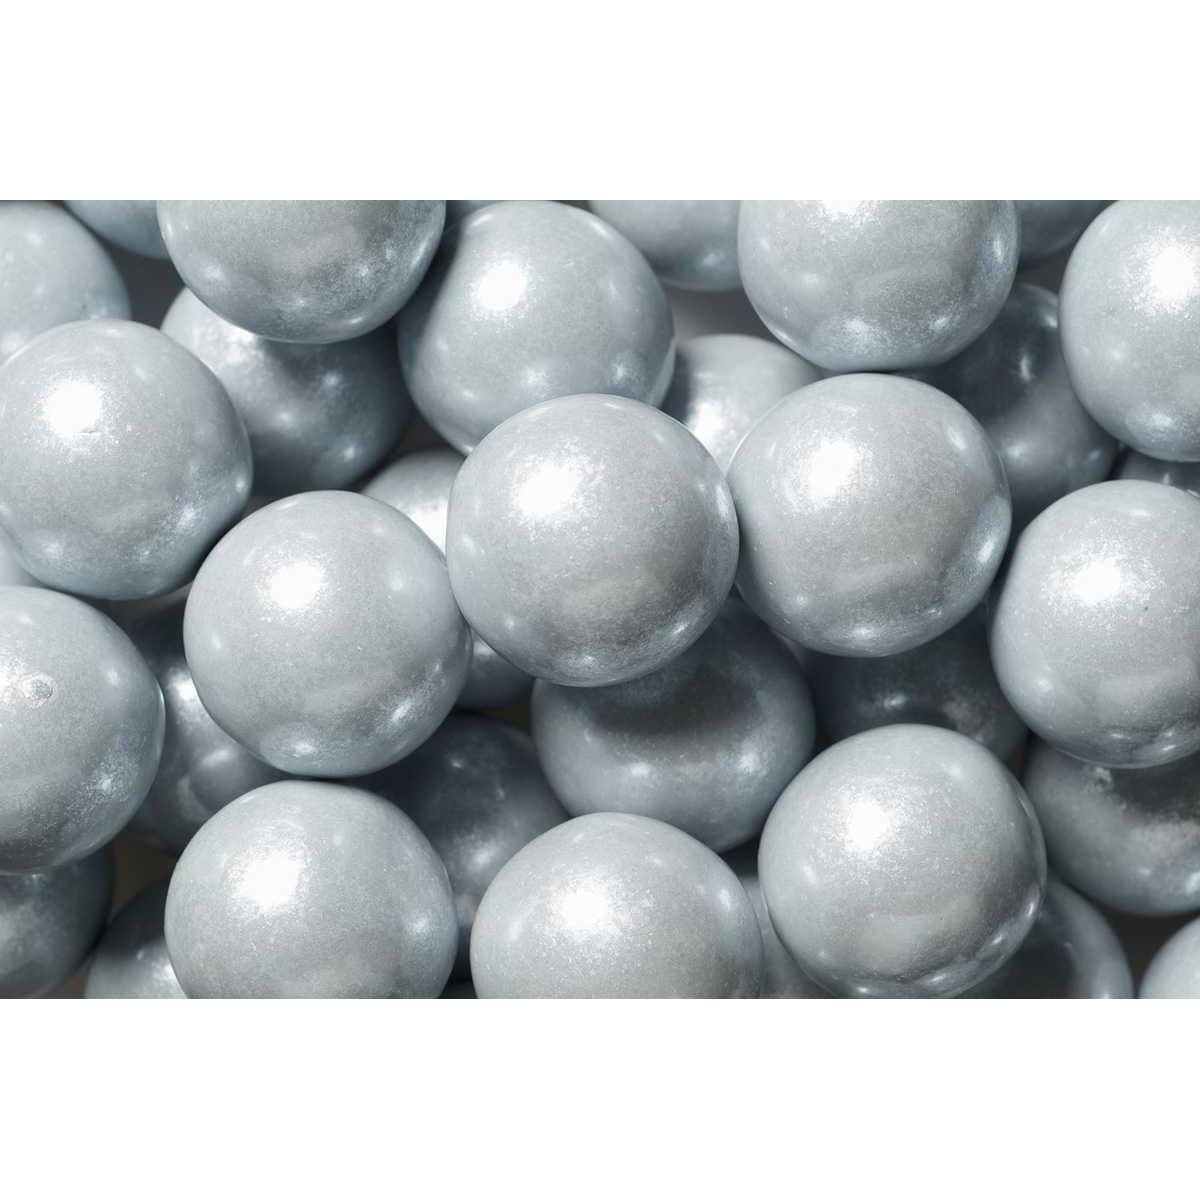 Buy Candy Gumballs Shimmer - Bulk Silver 2 Lbs sold at Party Expert